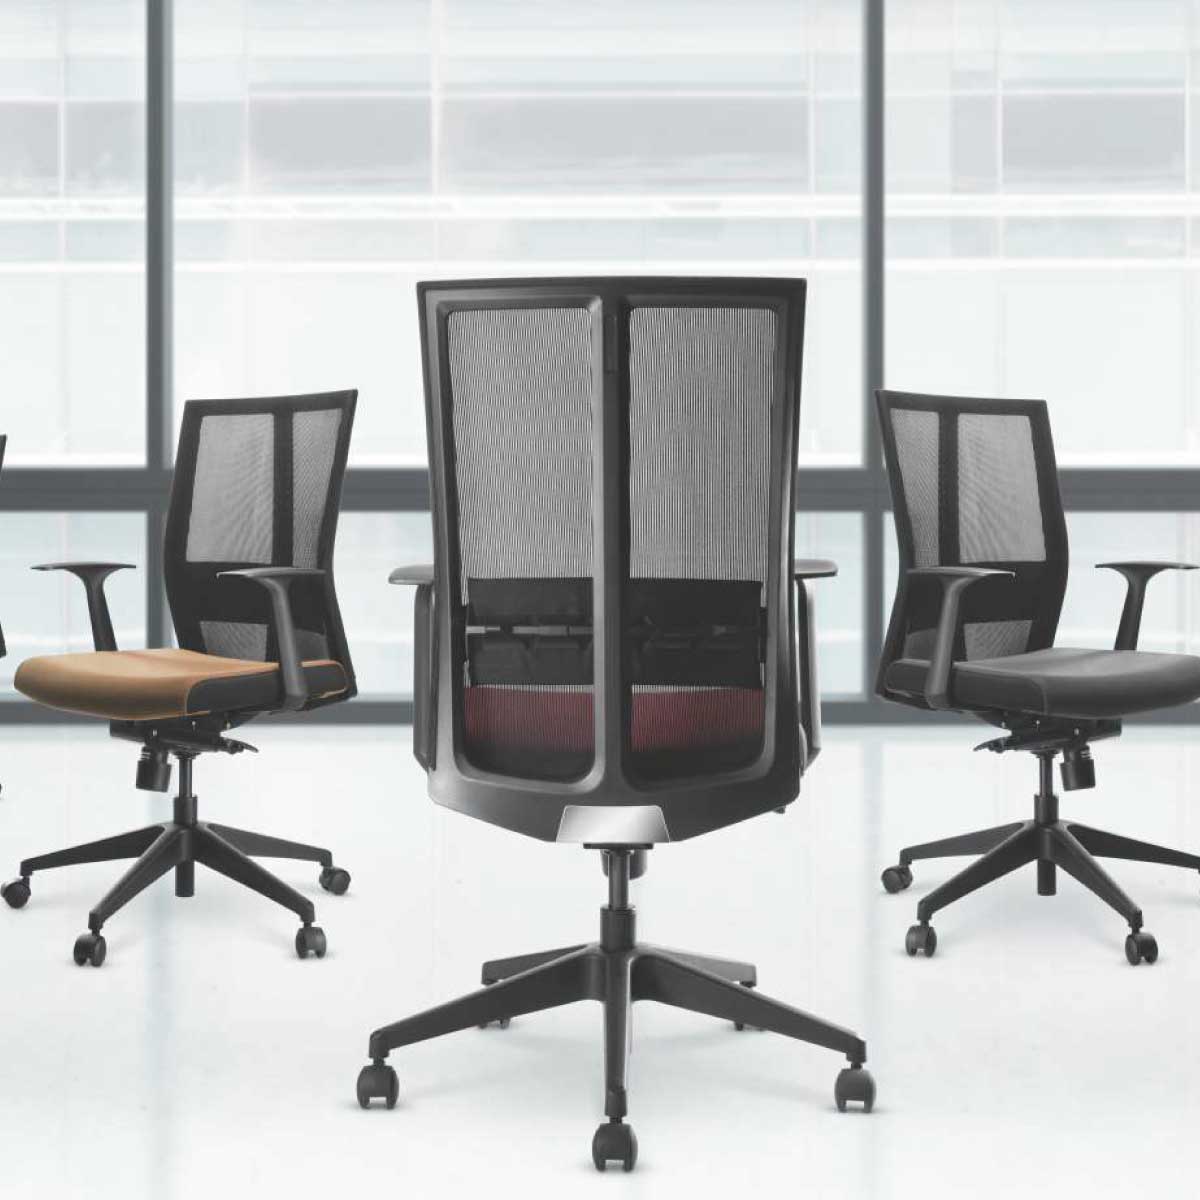 Visitor Chair Manufacturers, Suppliers in Sahibabad